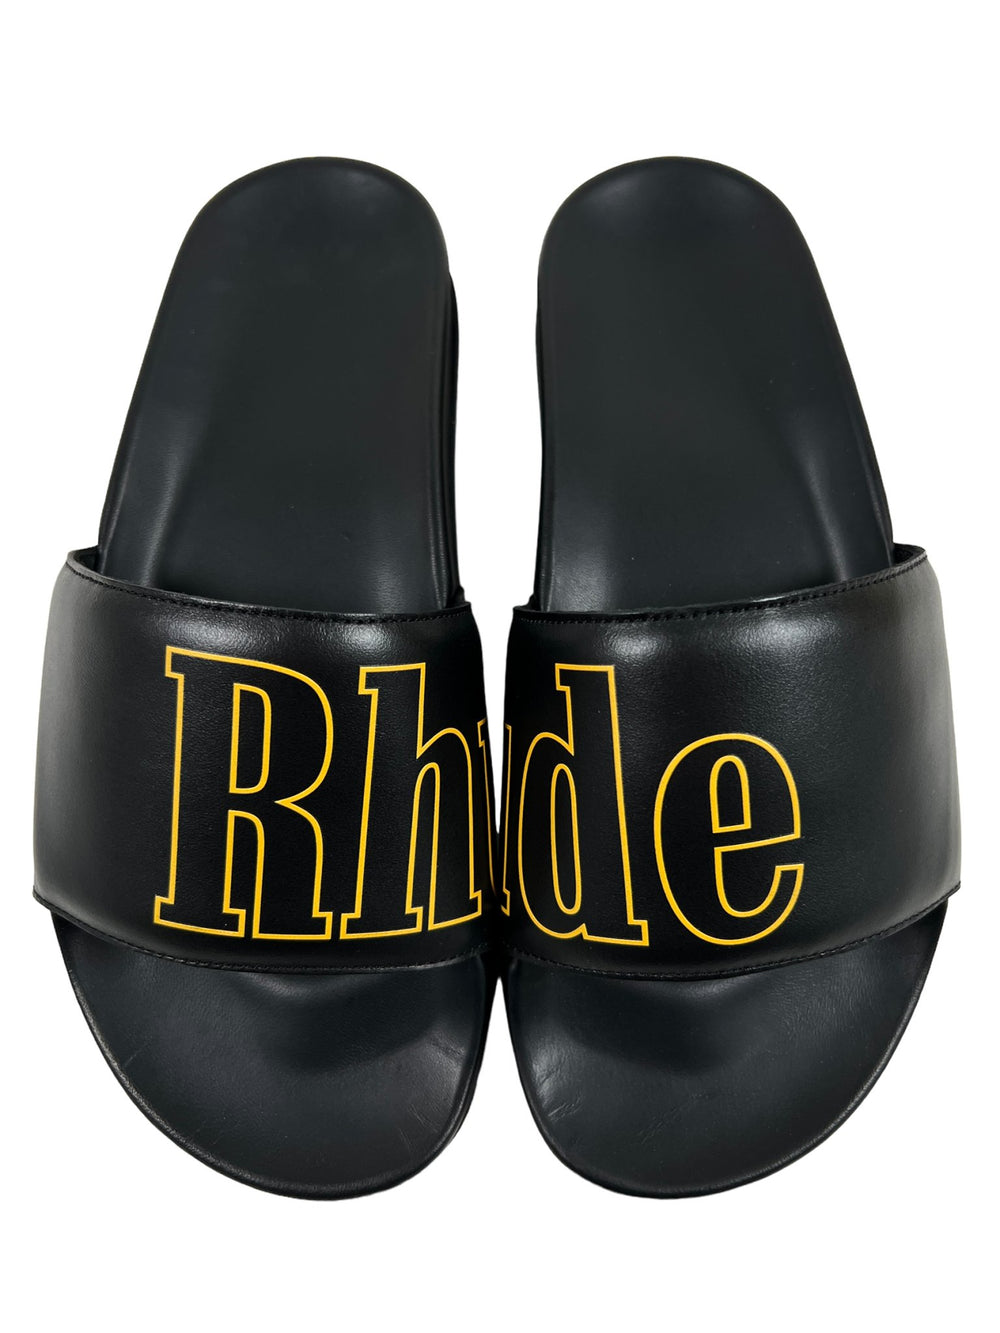 A pair of RHUDE leather slide sandals with the word "rhie" on them, crafted in Italy.